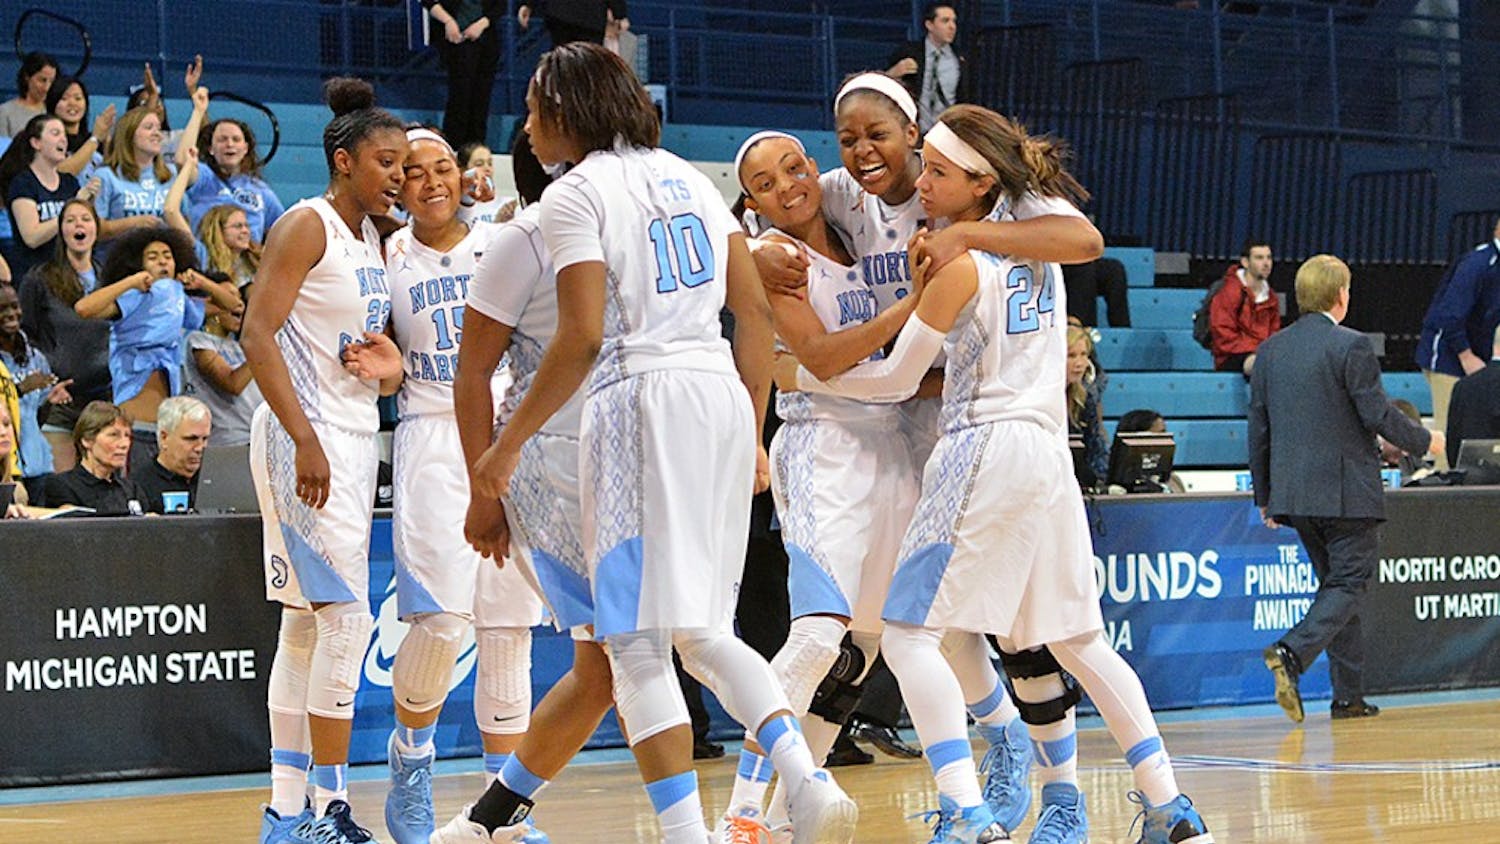 UNC women's basketball came from behind to defeat UT Martin 60-58 on Mar. 23, 2014 in Carmichael Arena in Chapel Hill.